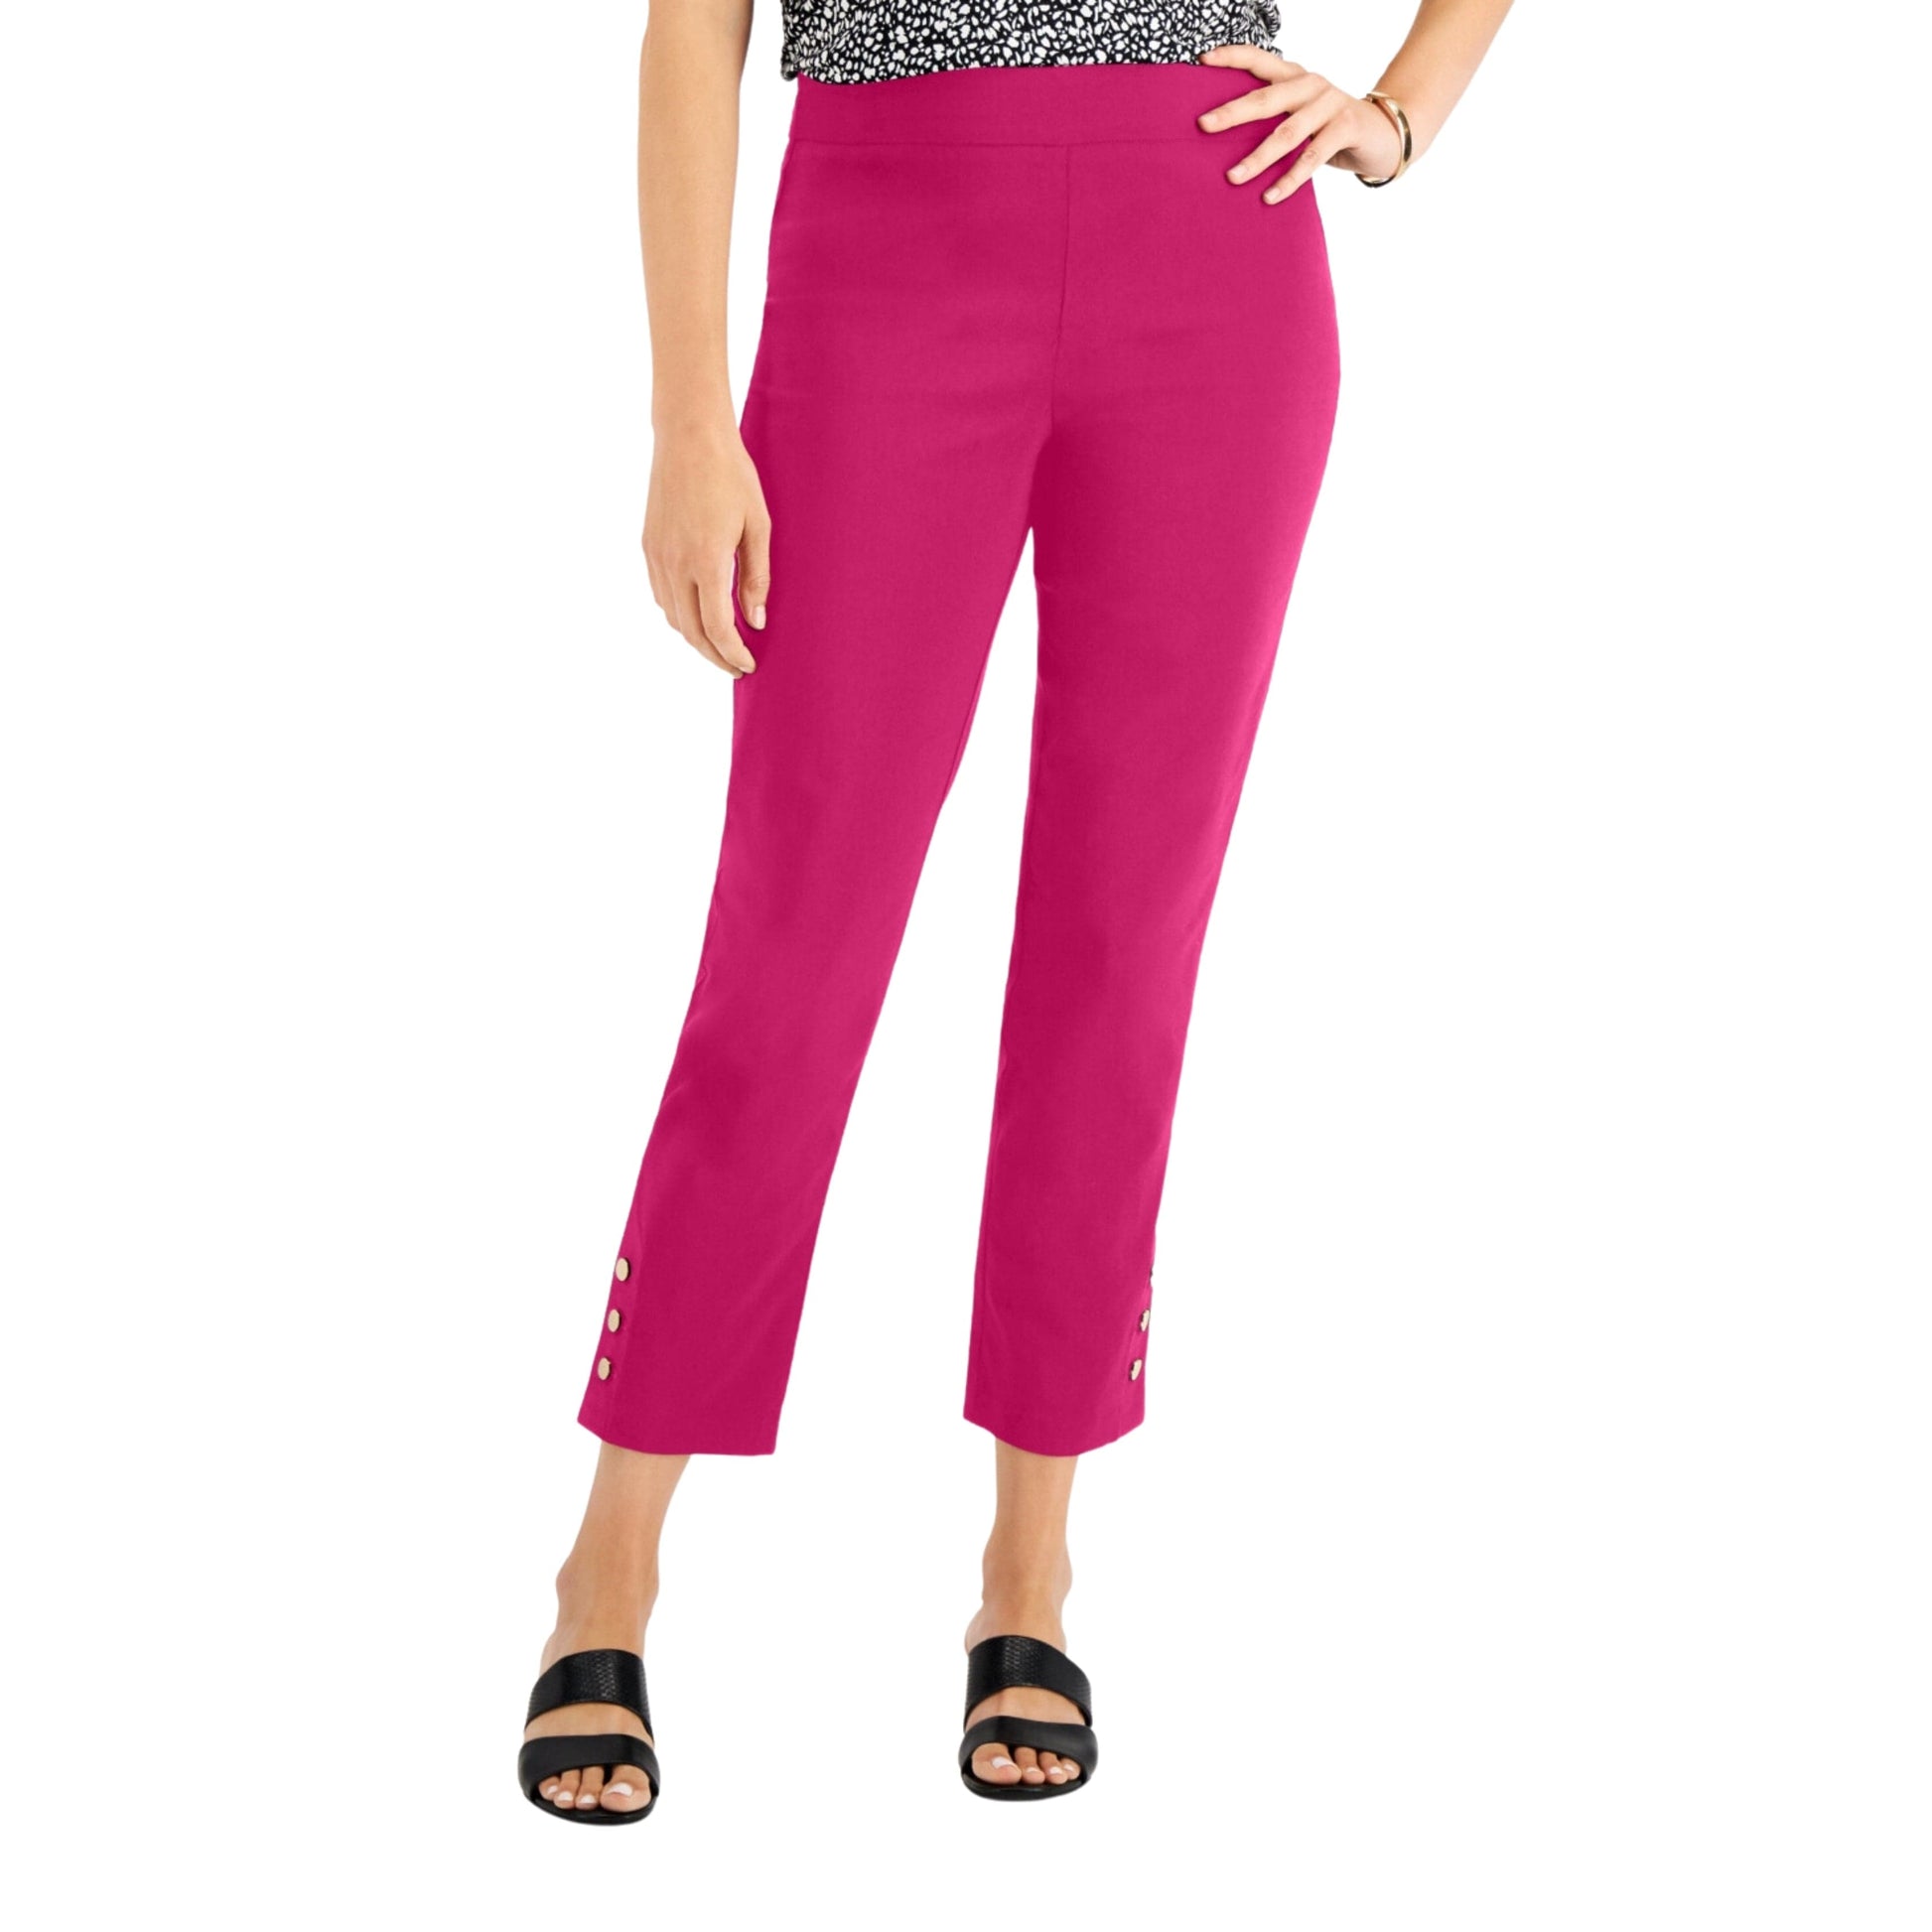 JM COLLECTION Womens Bottoms S / Pink JM COLLECTION - Snap-Hem Pull-on Pants